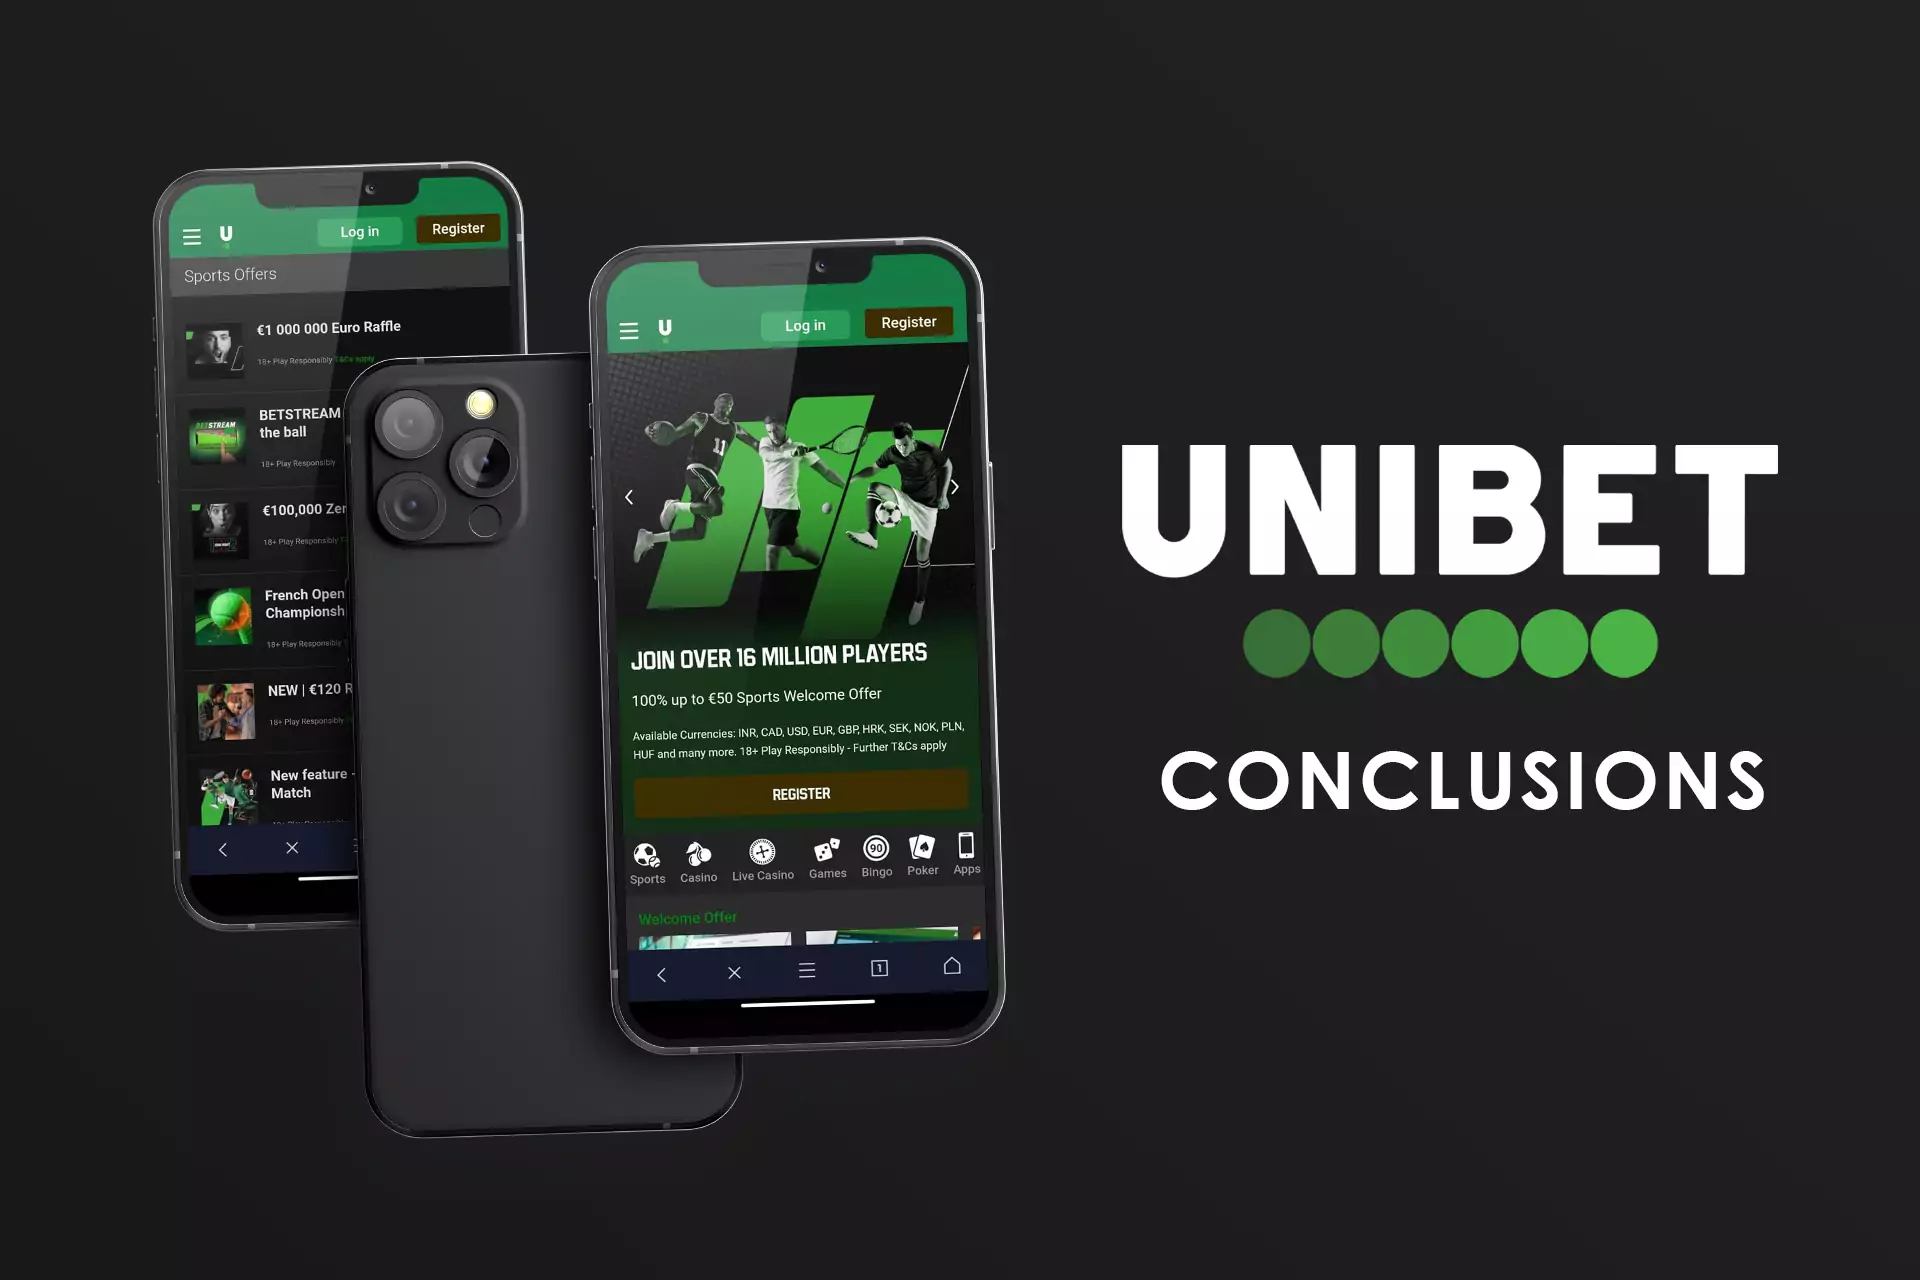 Read the conclusions about the quality of the Unibet app for your smartphone.